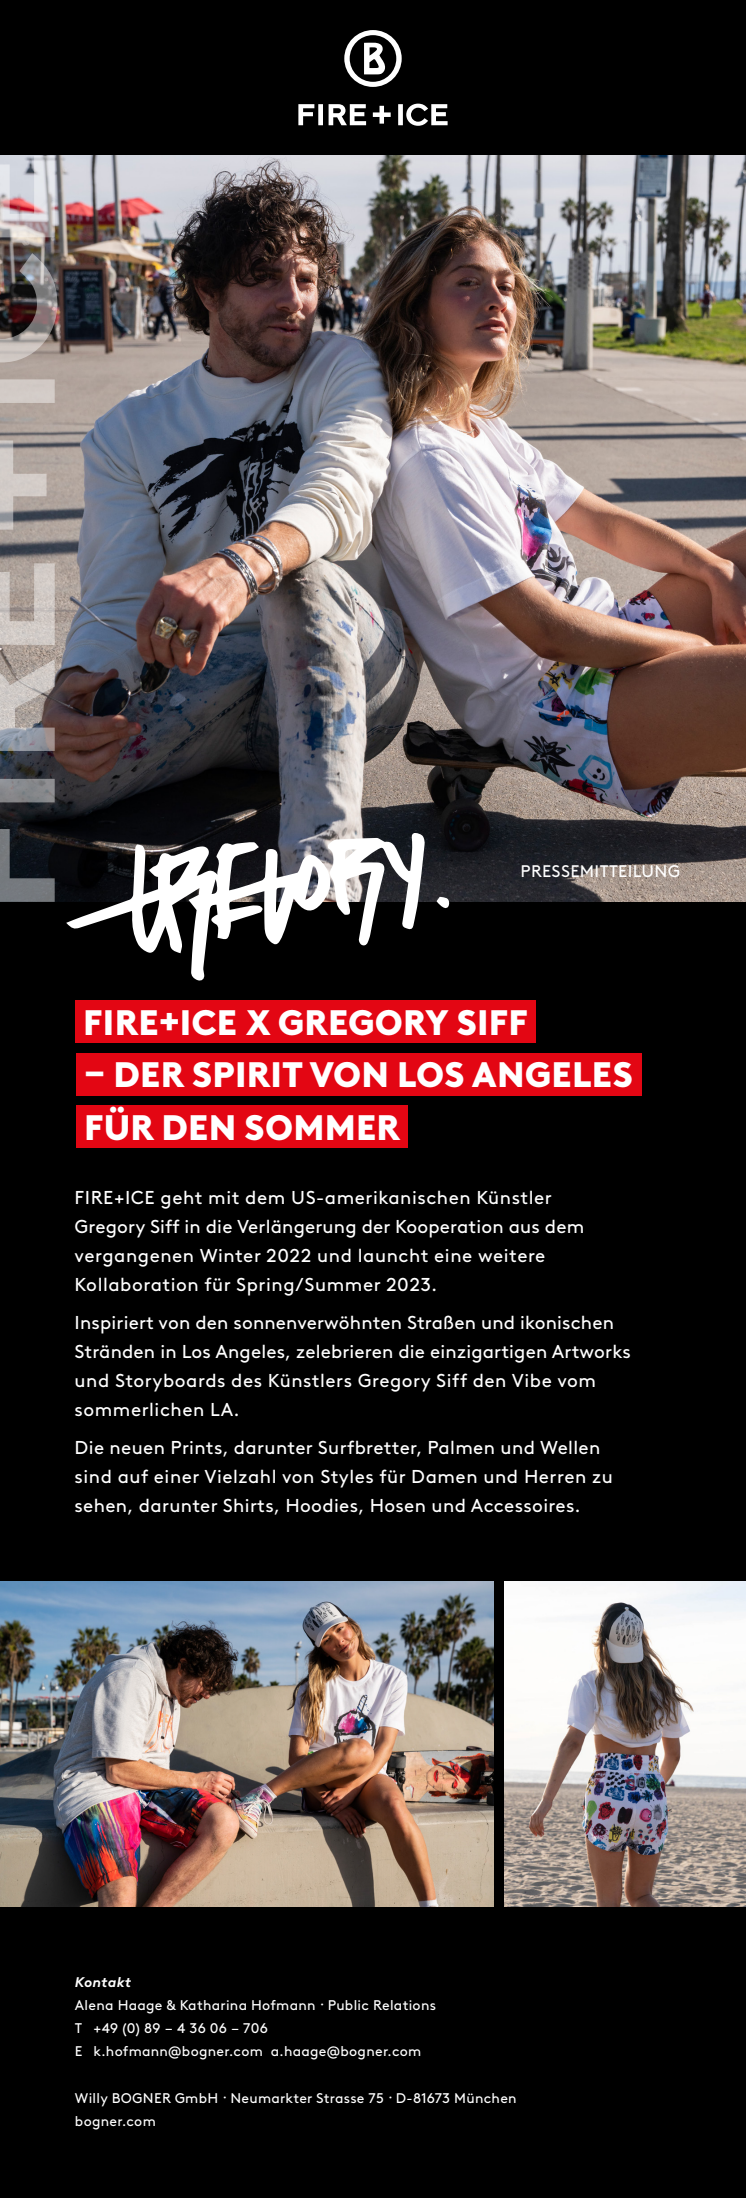 FIRE+ICE_Gregory Siff_Spring Summer 2023_Pressemitteilung.pdf